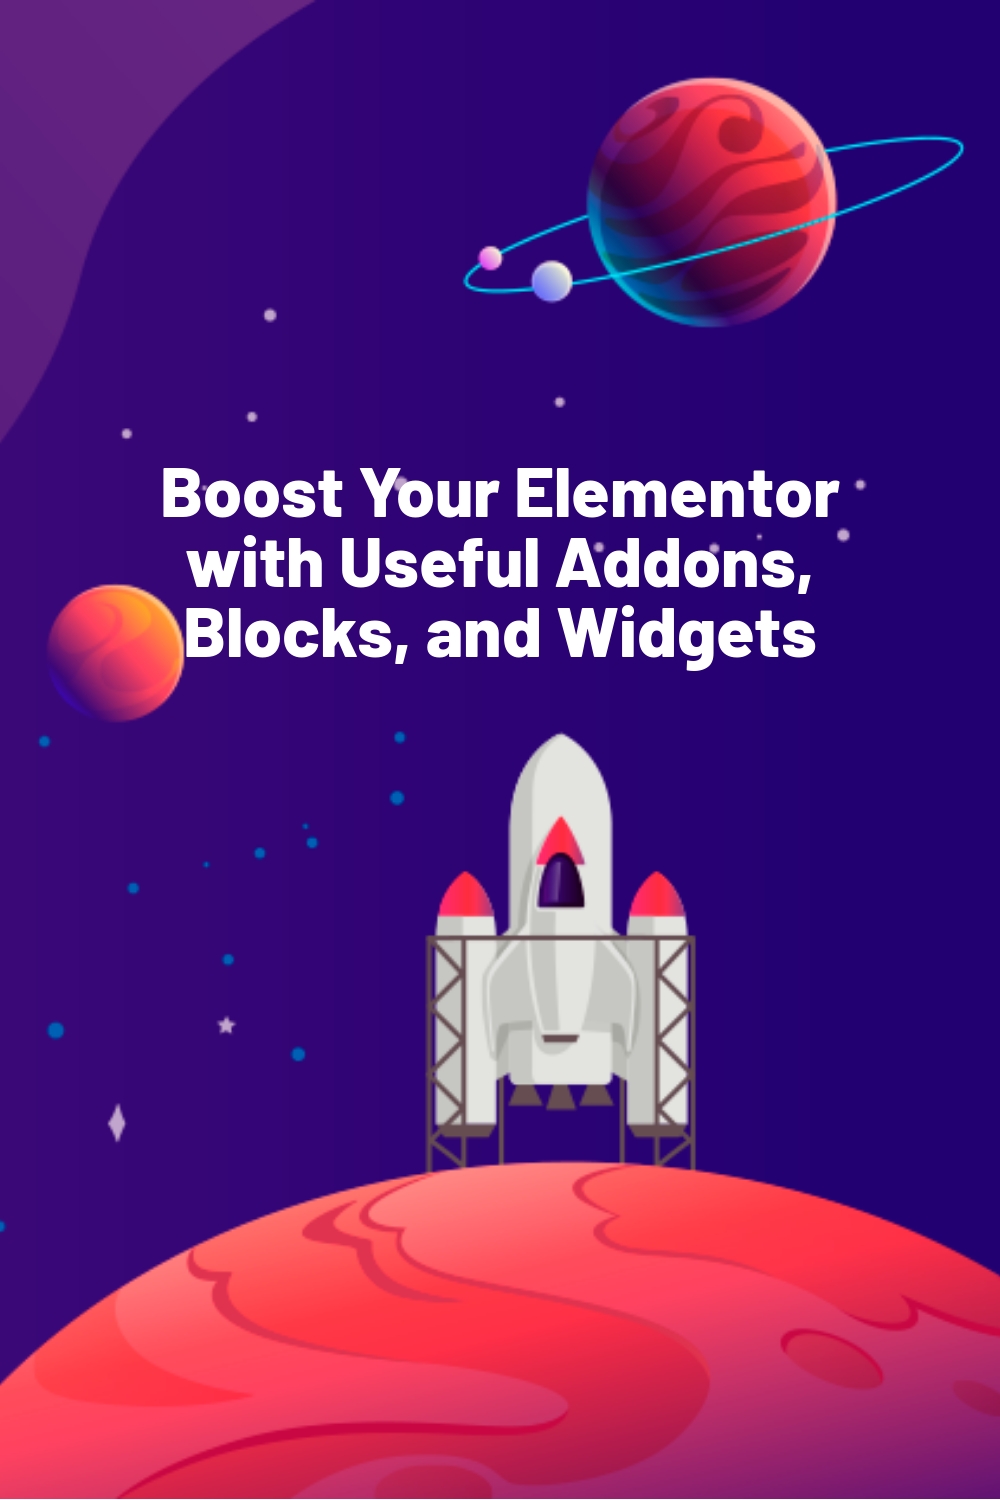 Boost Your Elementor with Useful Addons, Blocks, and Widgets